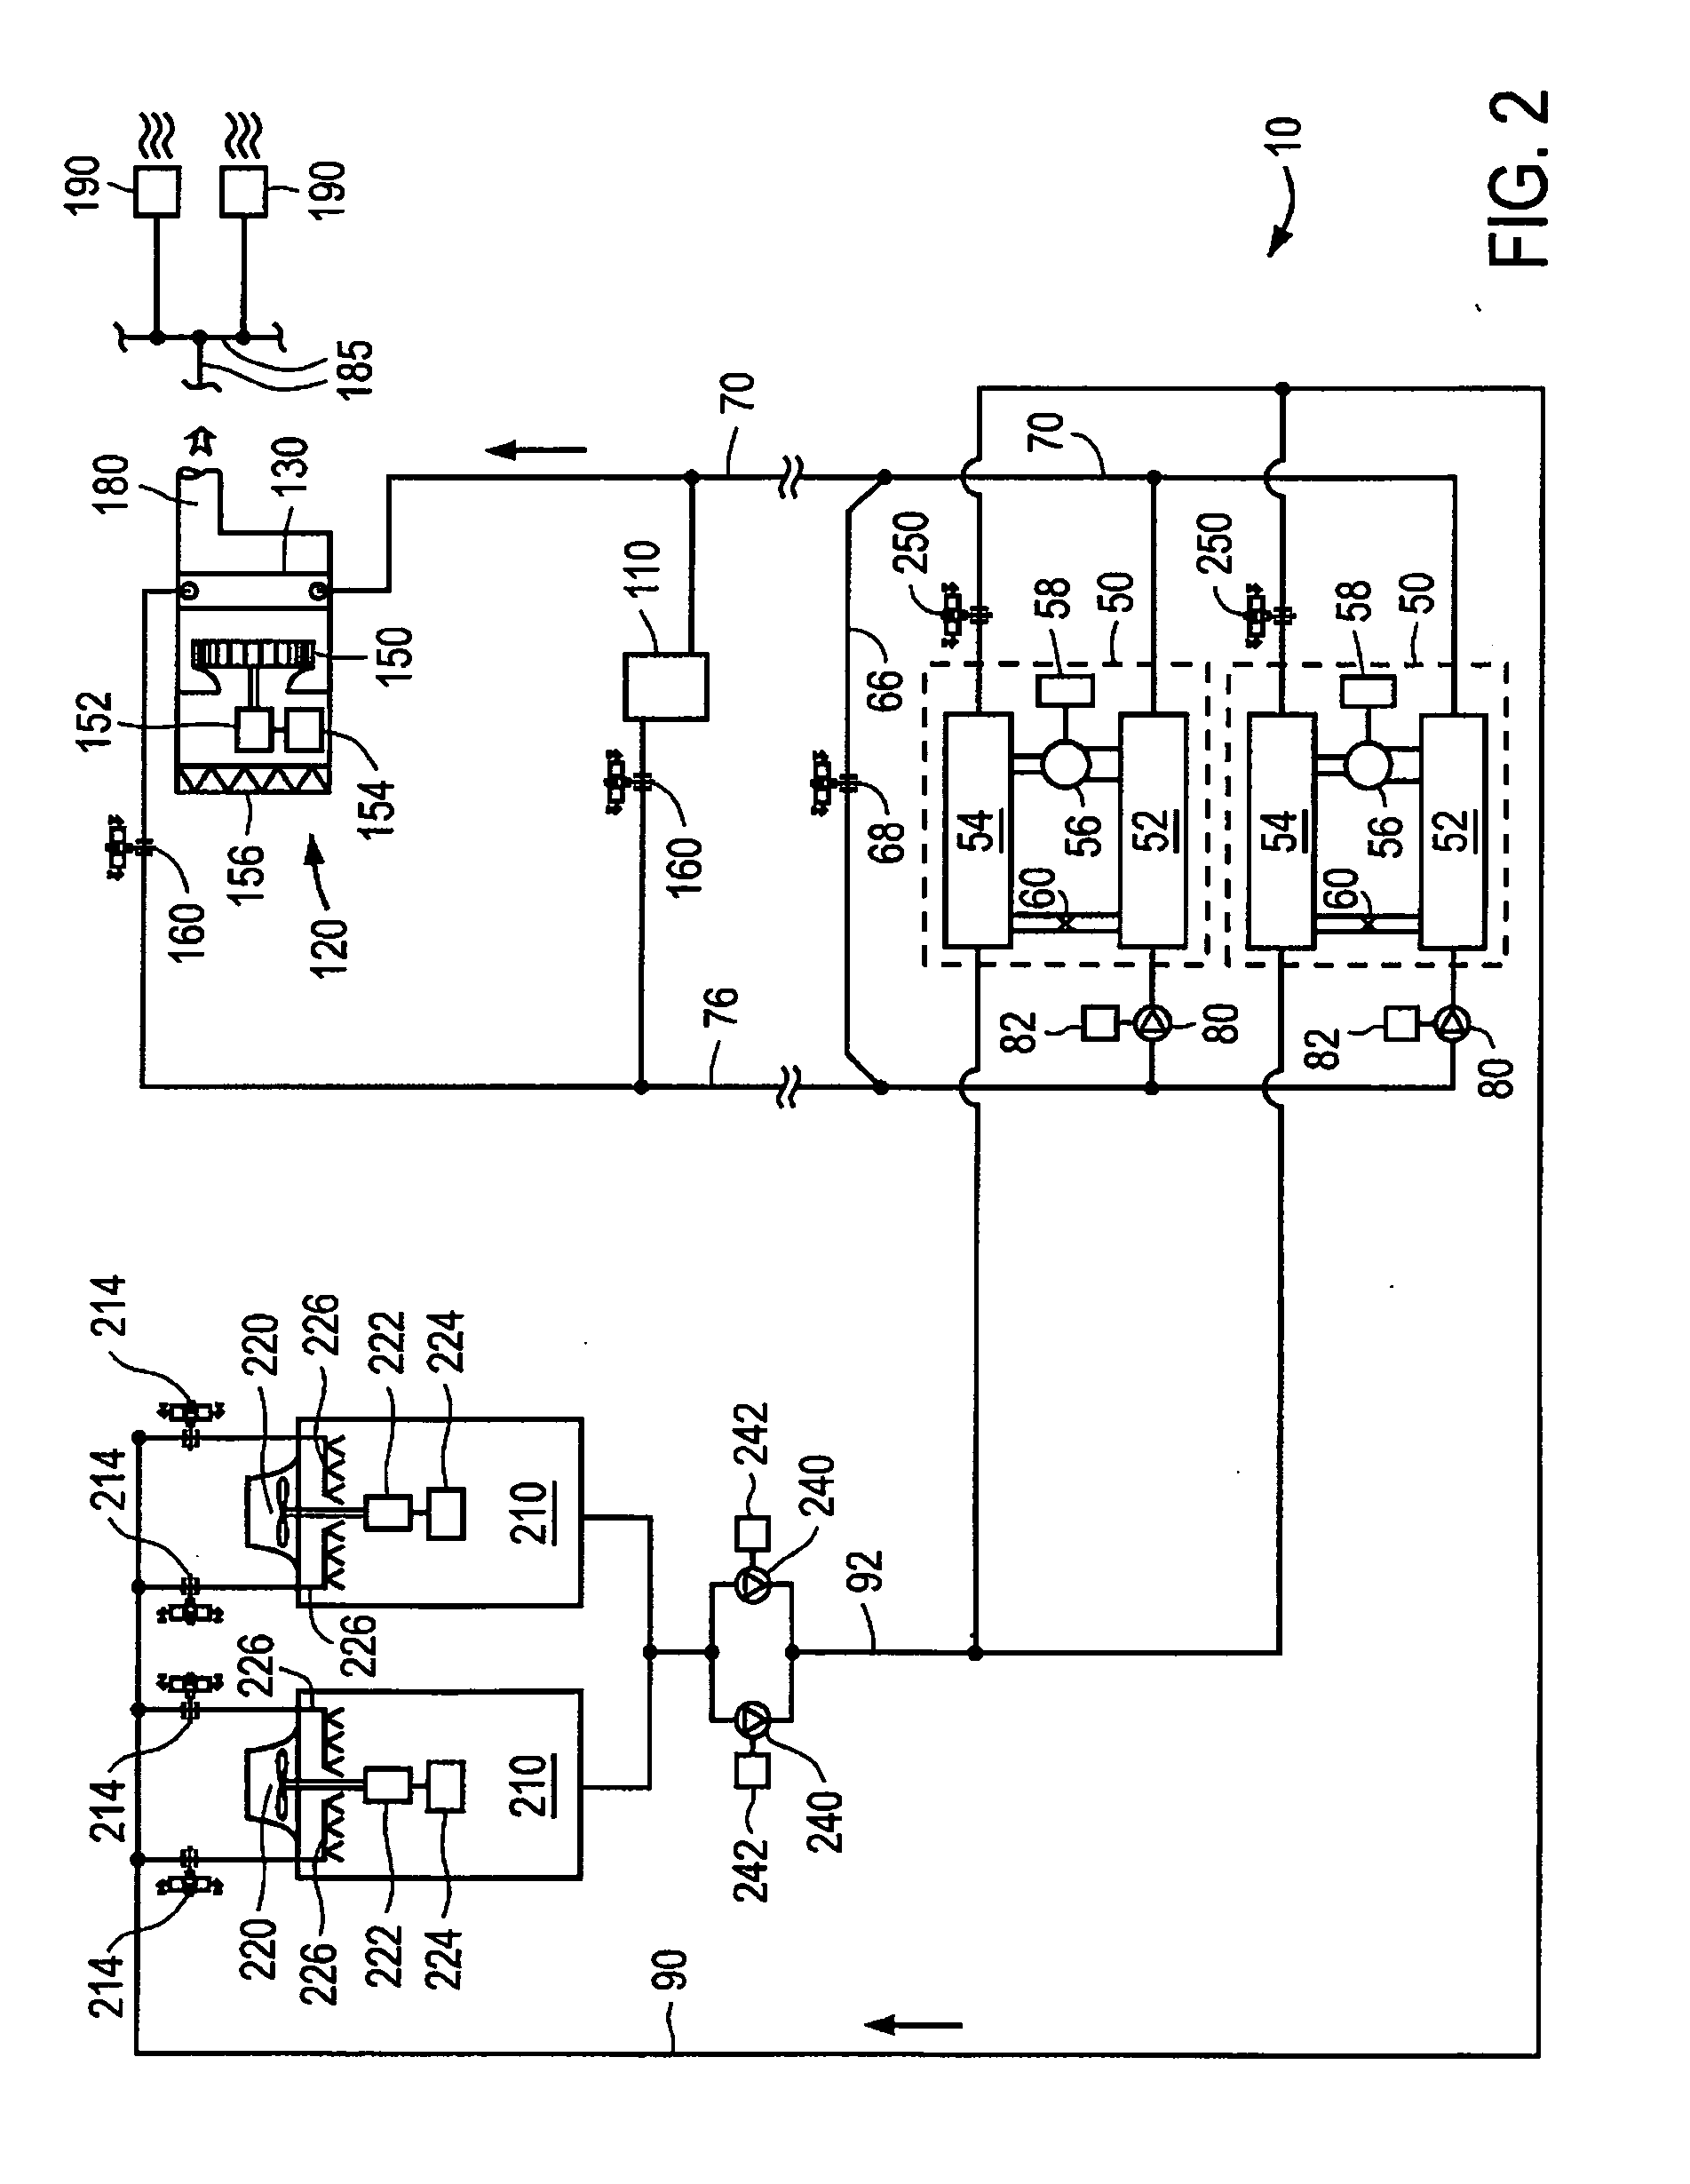 Optimized Control System For Cooling Systems